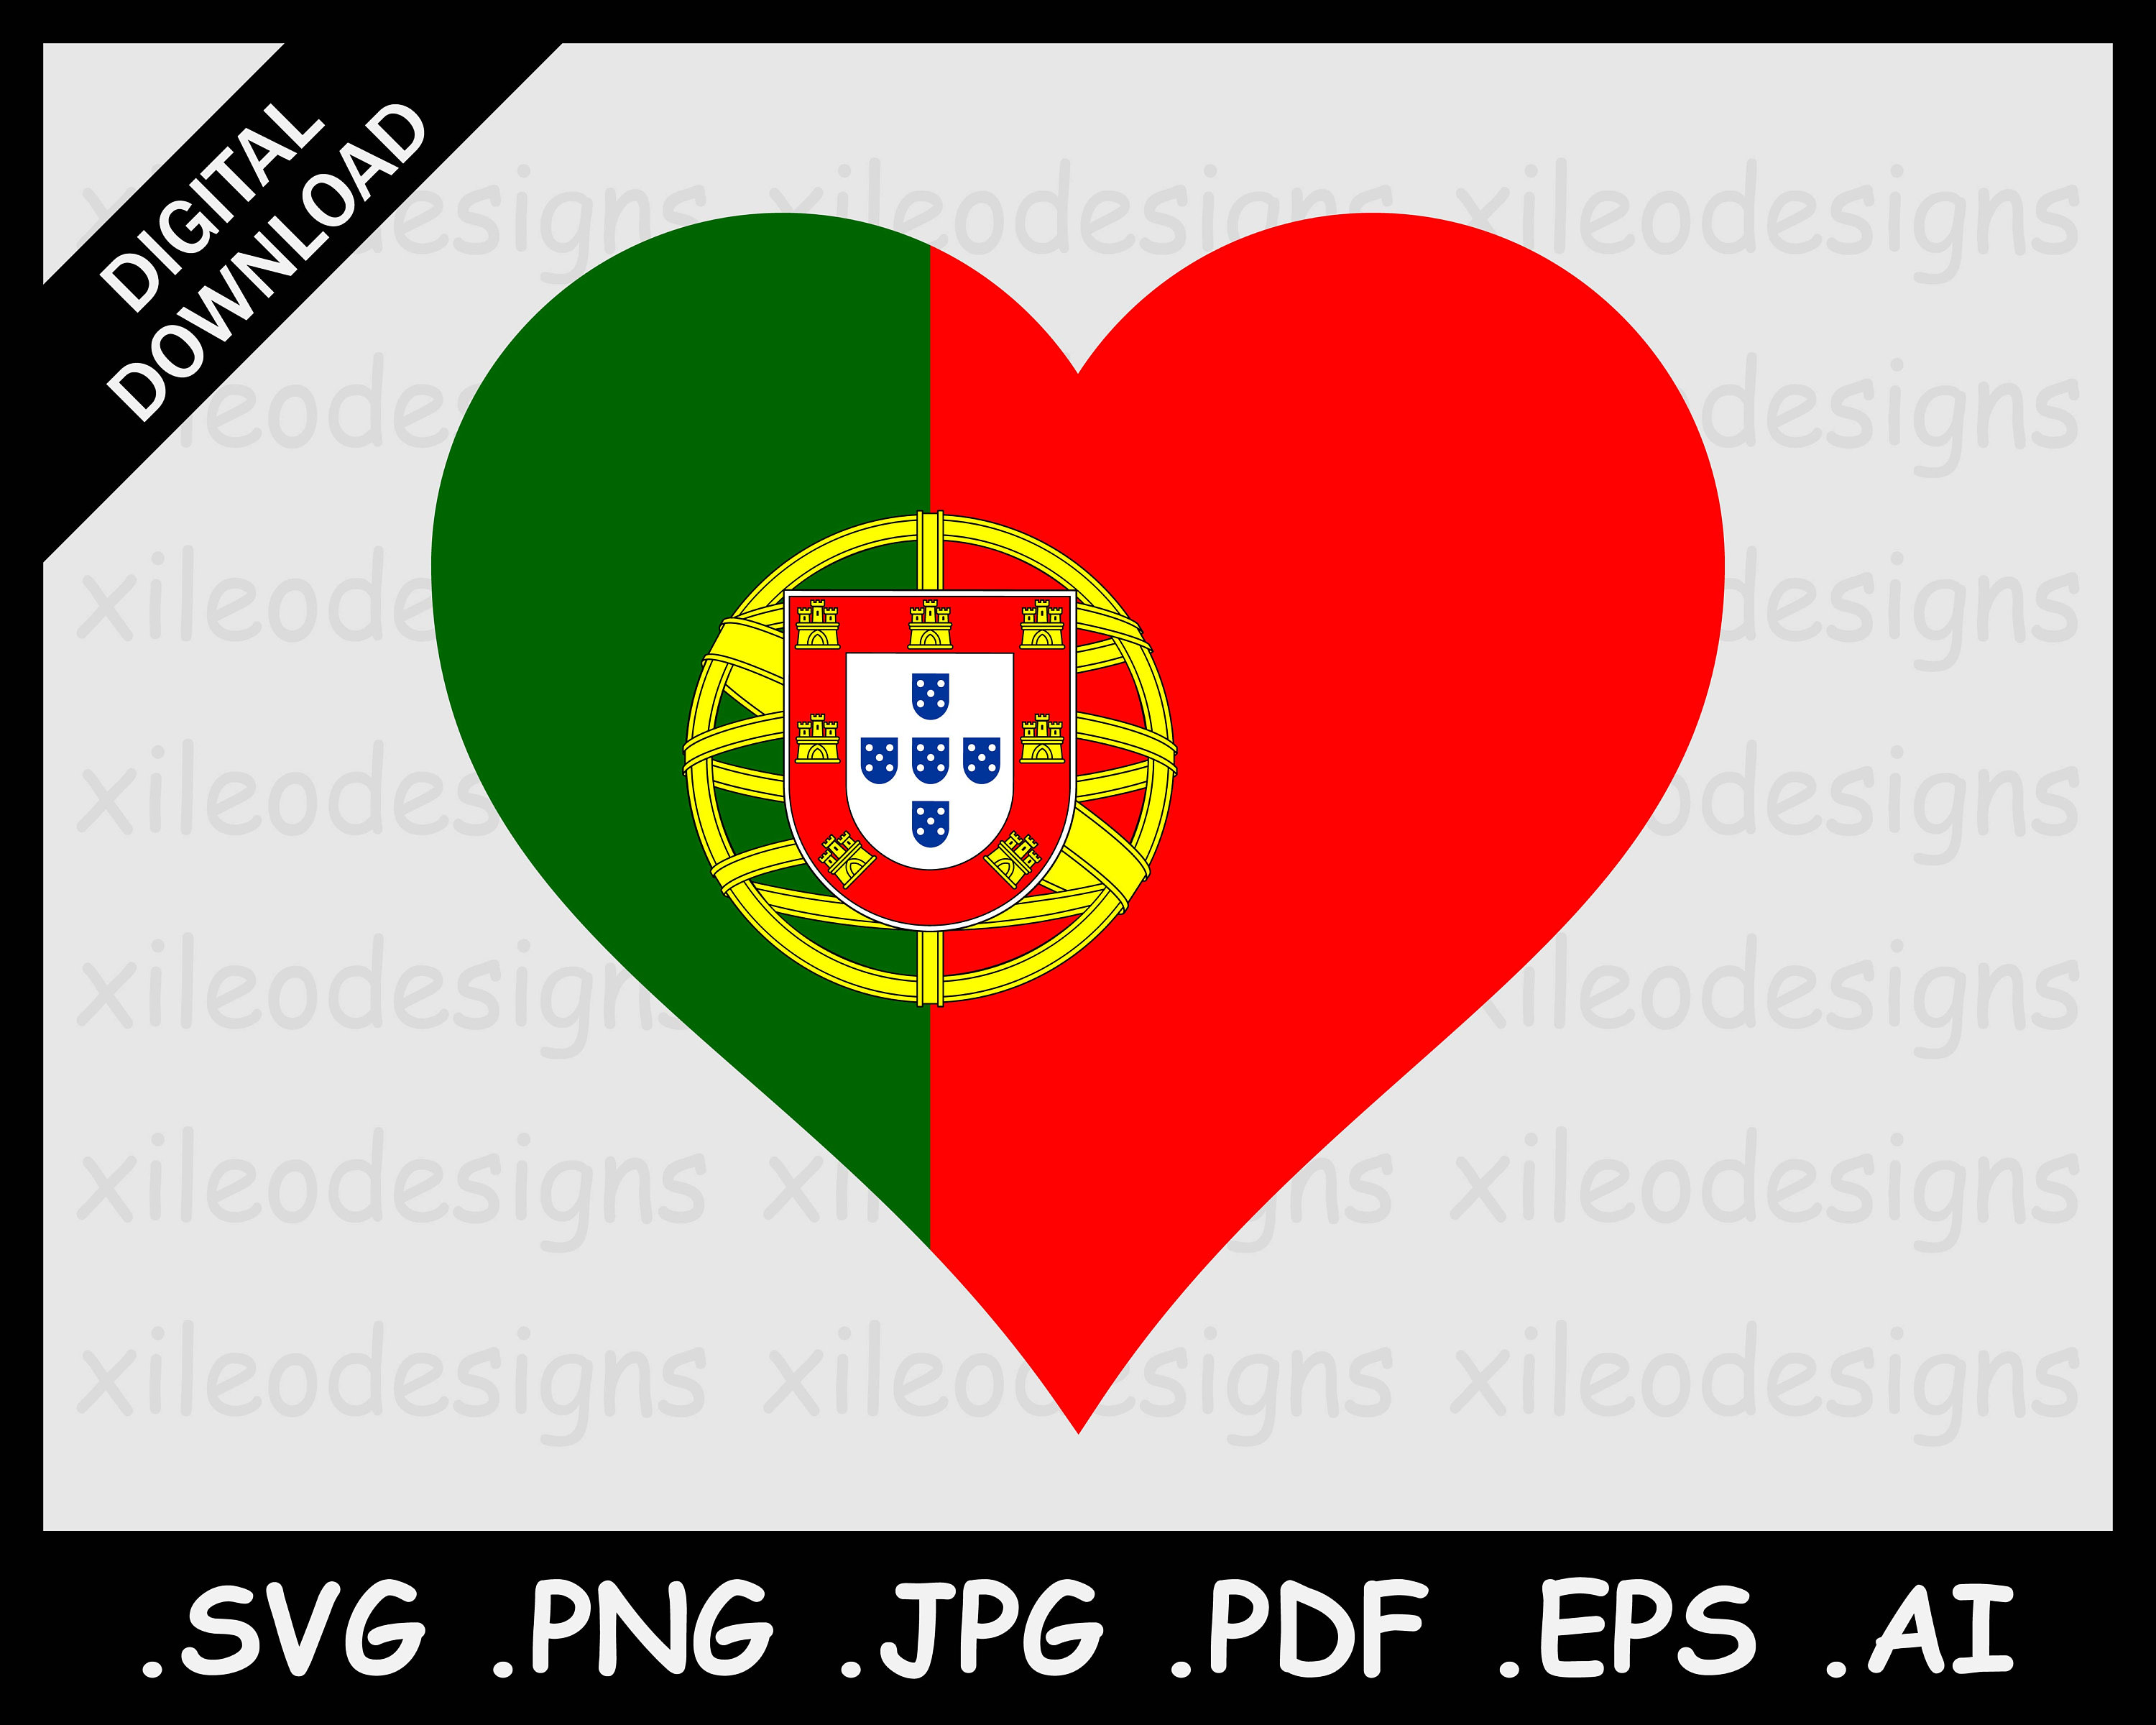 Portugal Map And Flag - Vector Illustration Royalty Free SVG